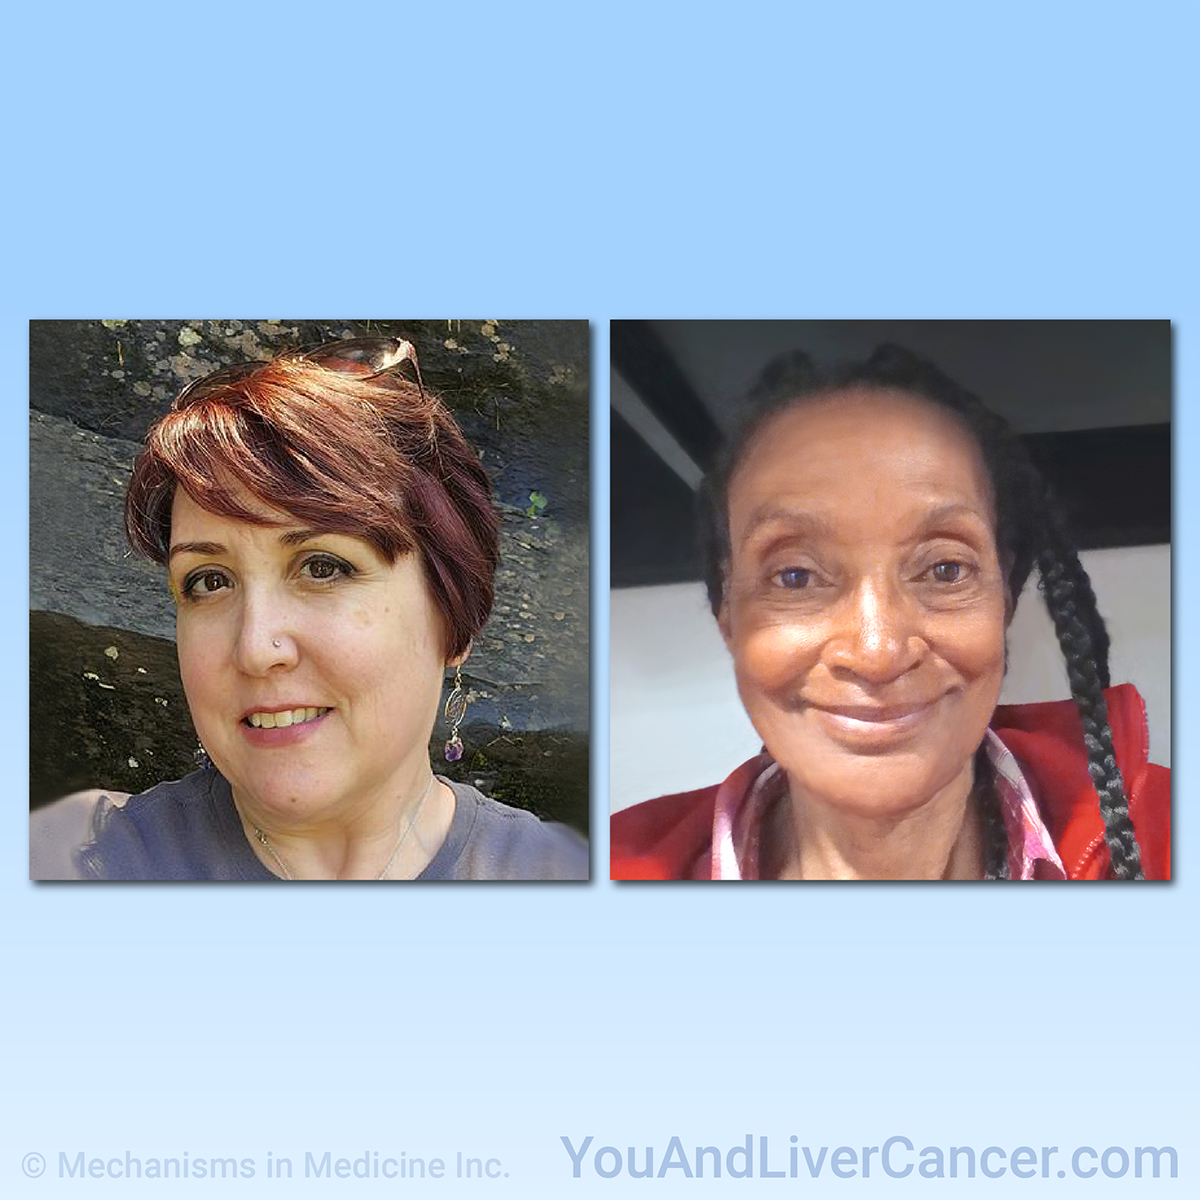 Hear from patients about their experience living with liver cancer